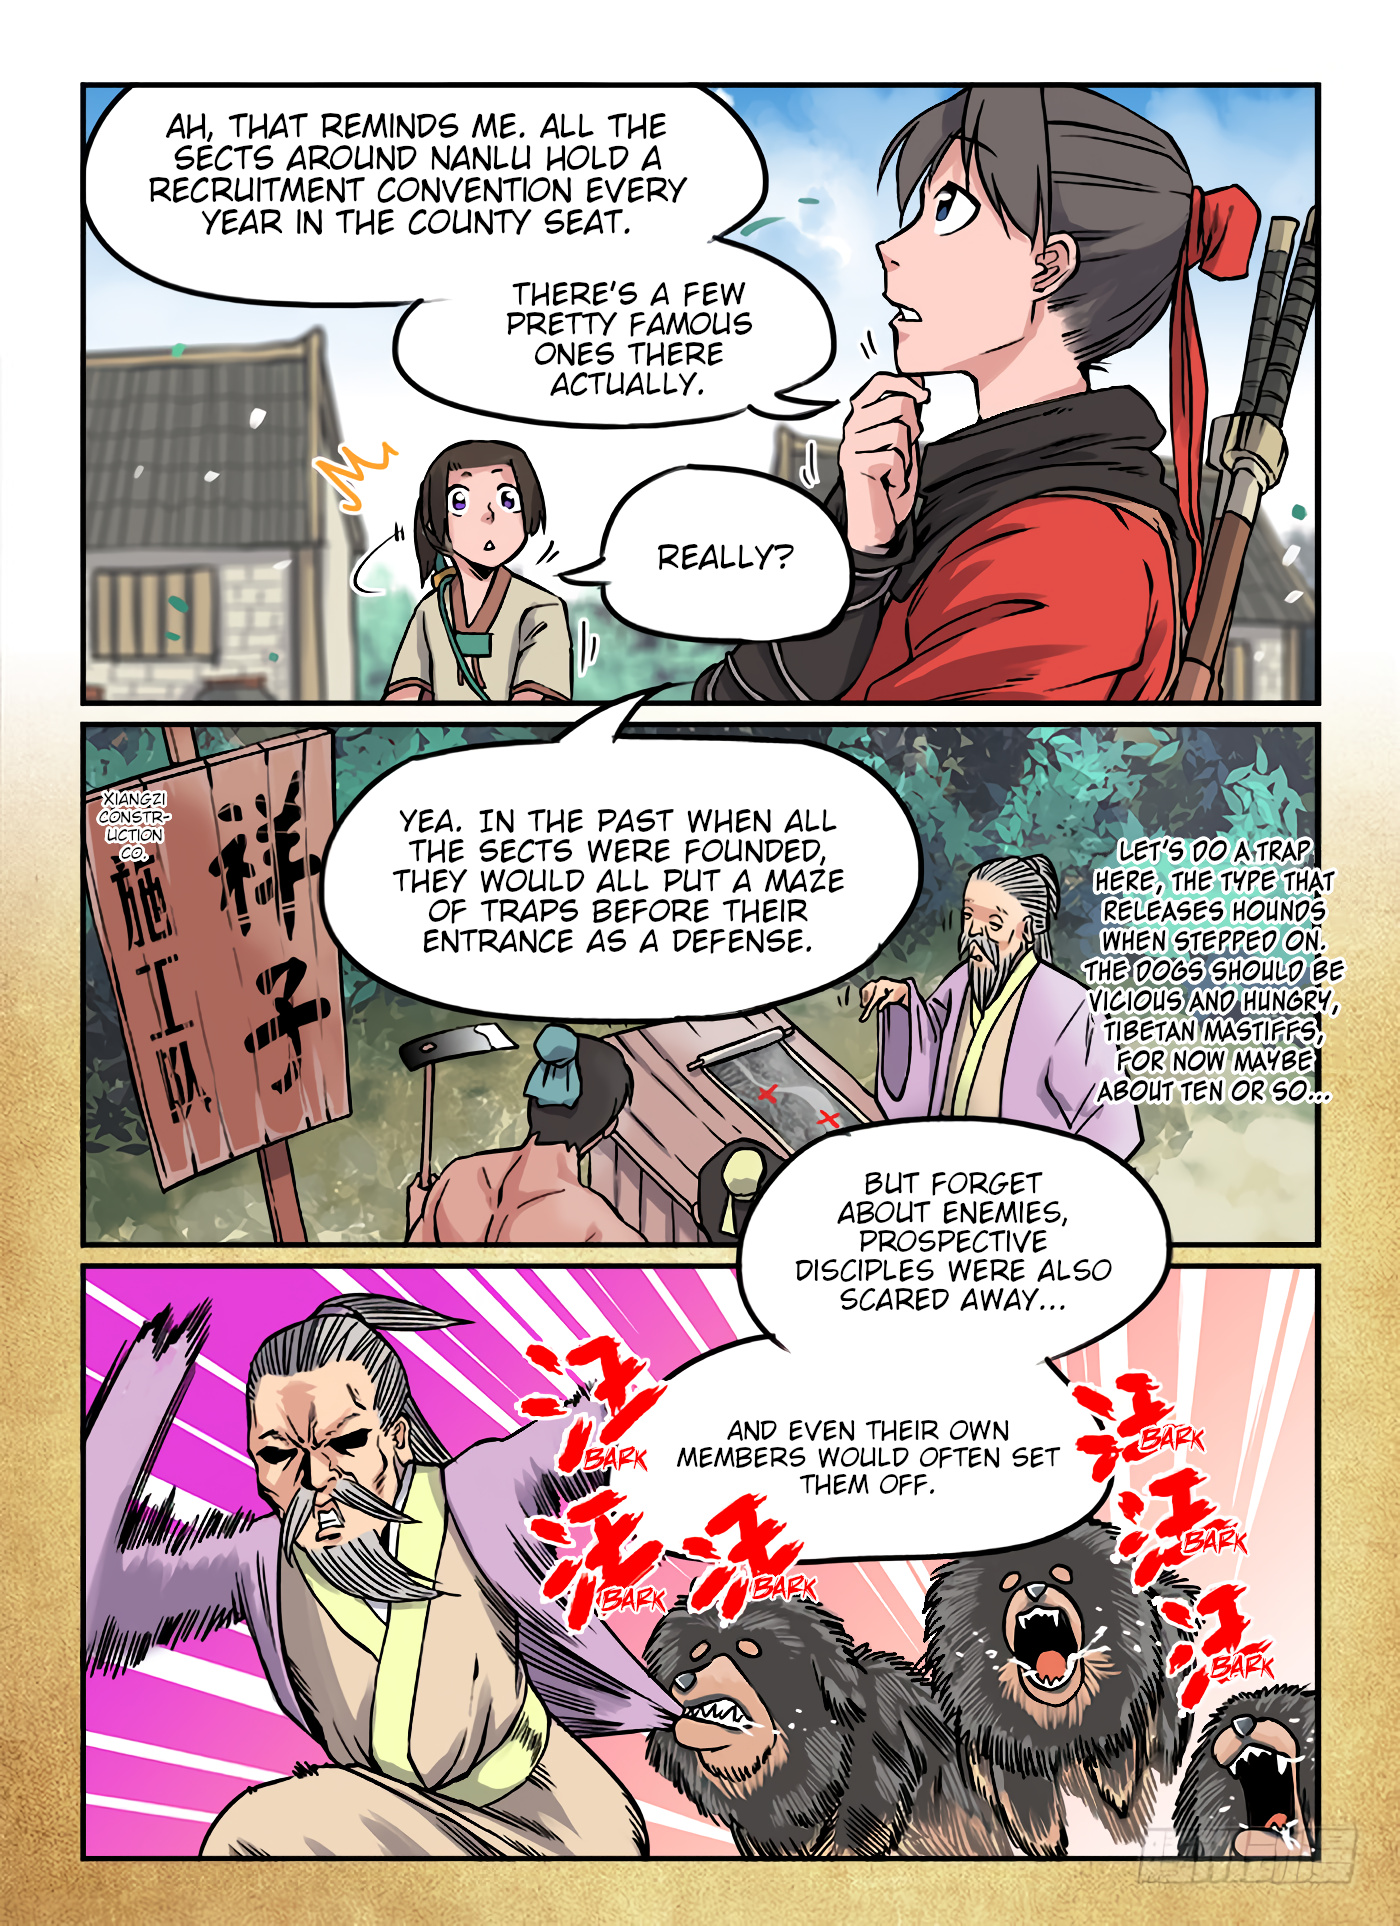 Elated Thirteen Swords Chapter 3: Recruitment Convention - Picture 2